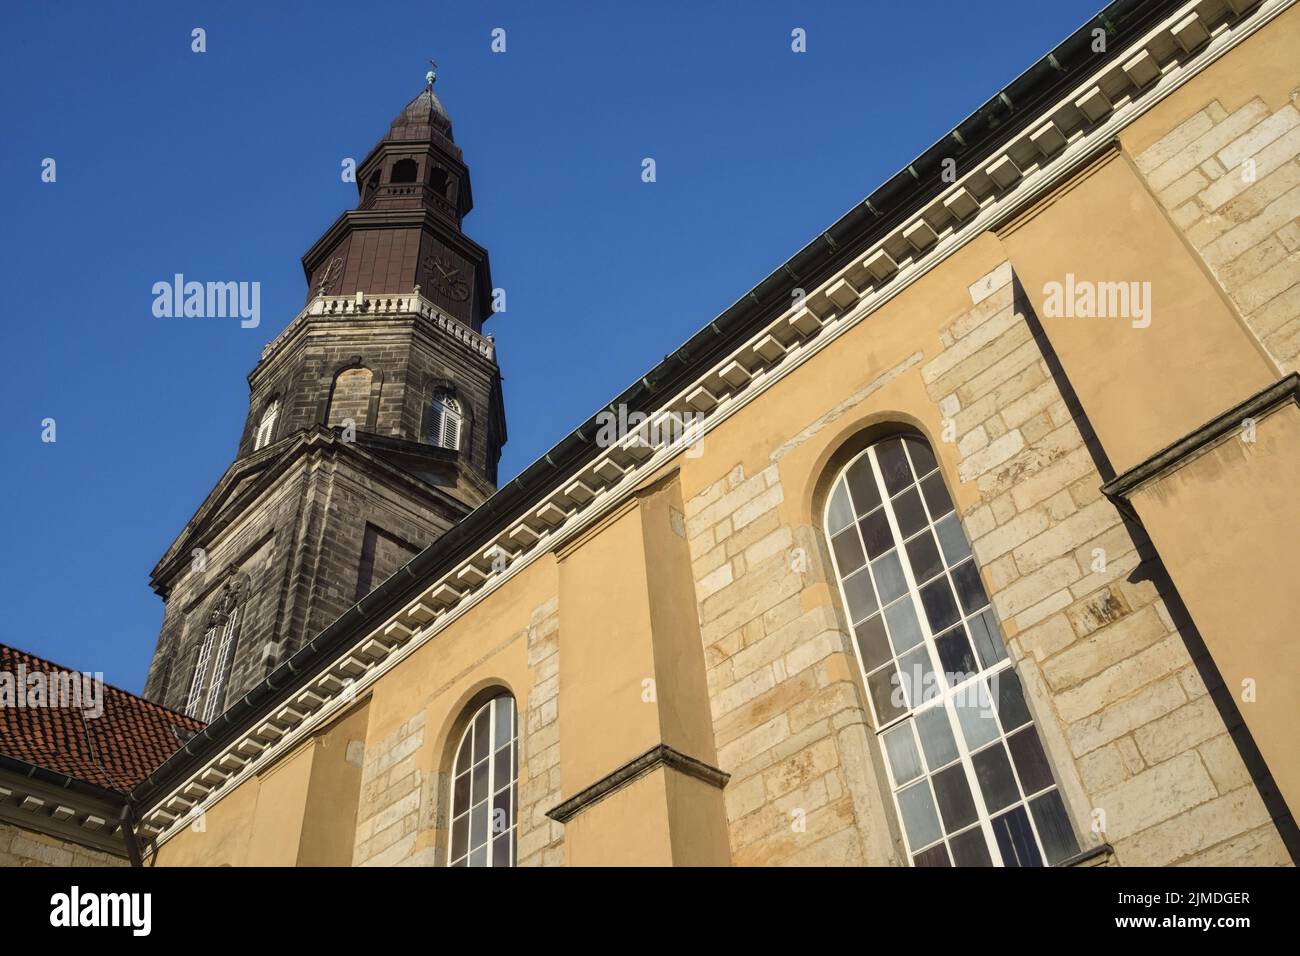 Hanover - St. John's Church of the court and the city in the New Town, Germany Stock Photo